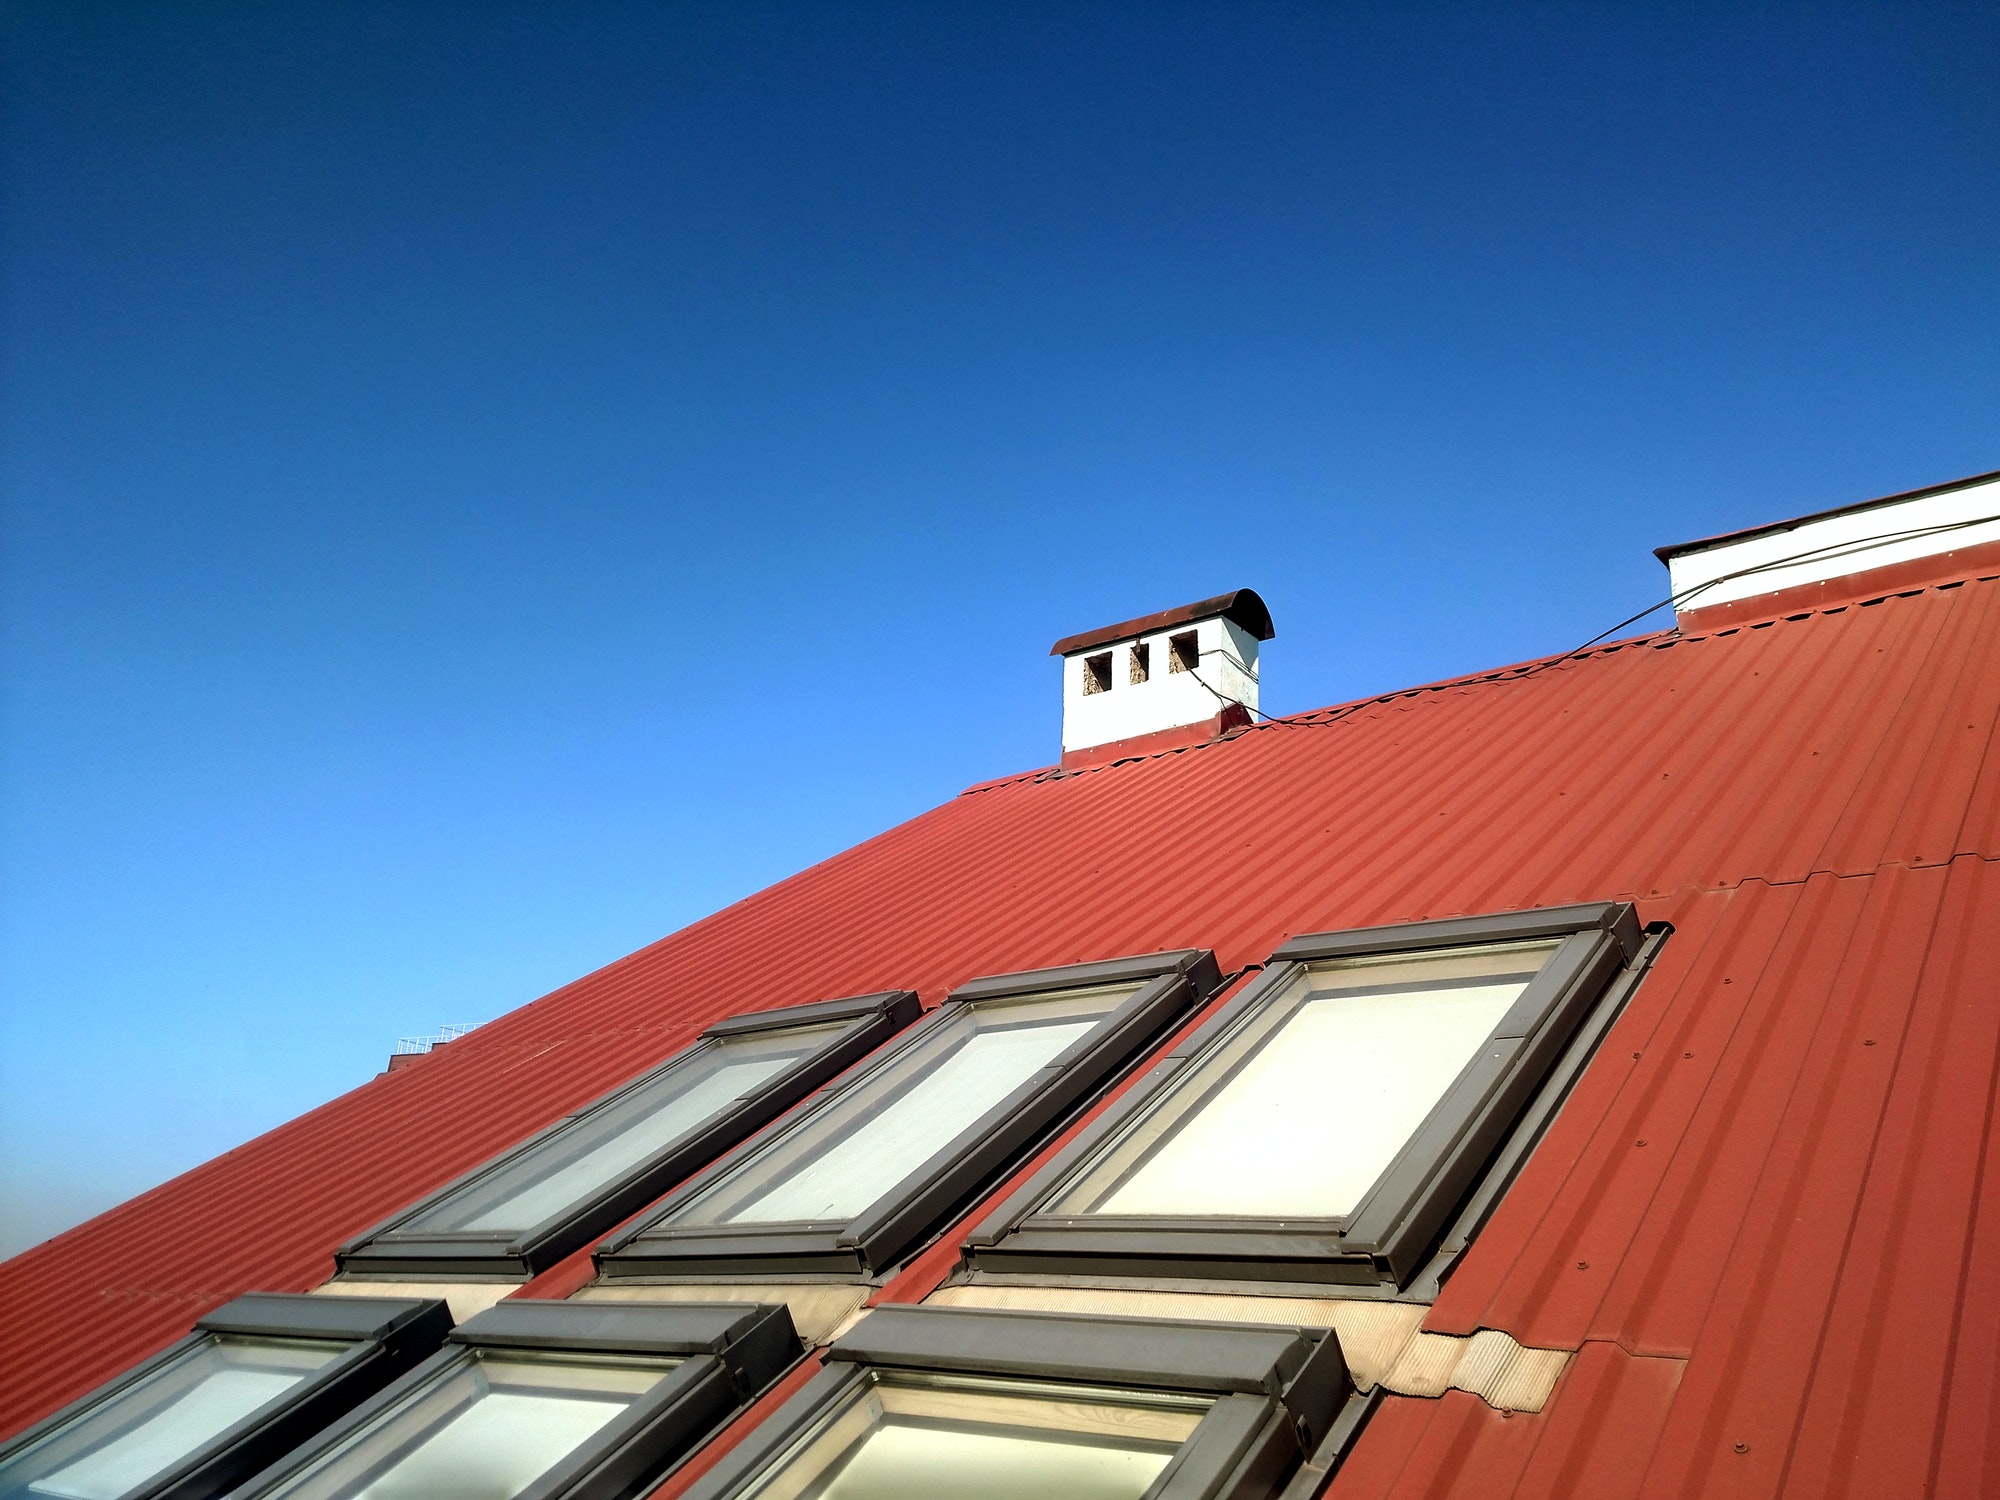 Red tiled house roof with attic windows. Roofing construction, window installation, modern